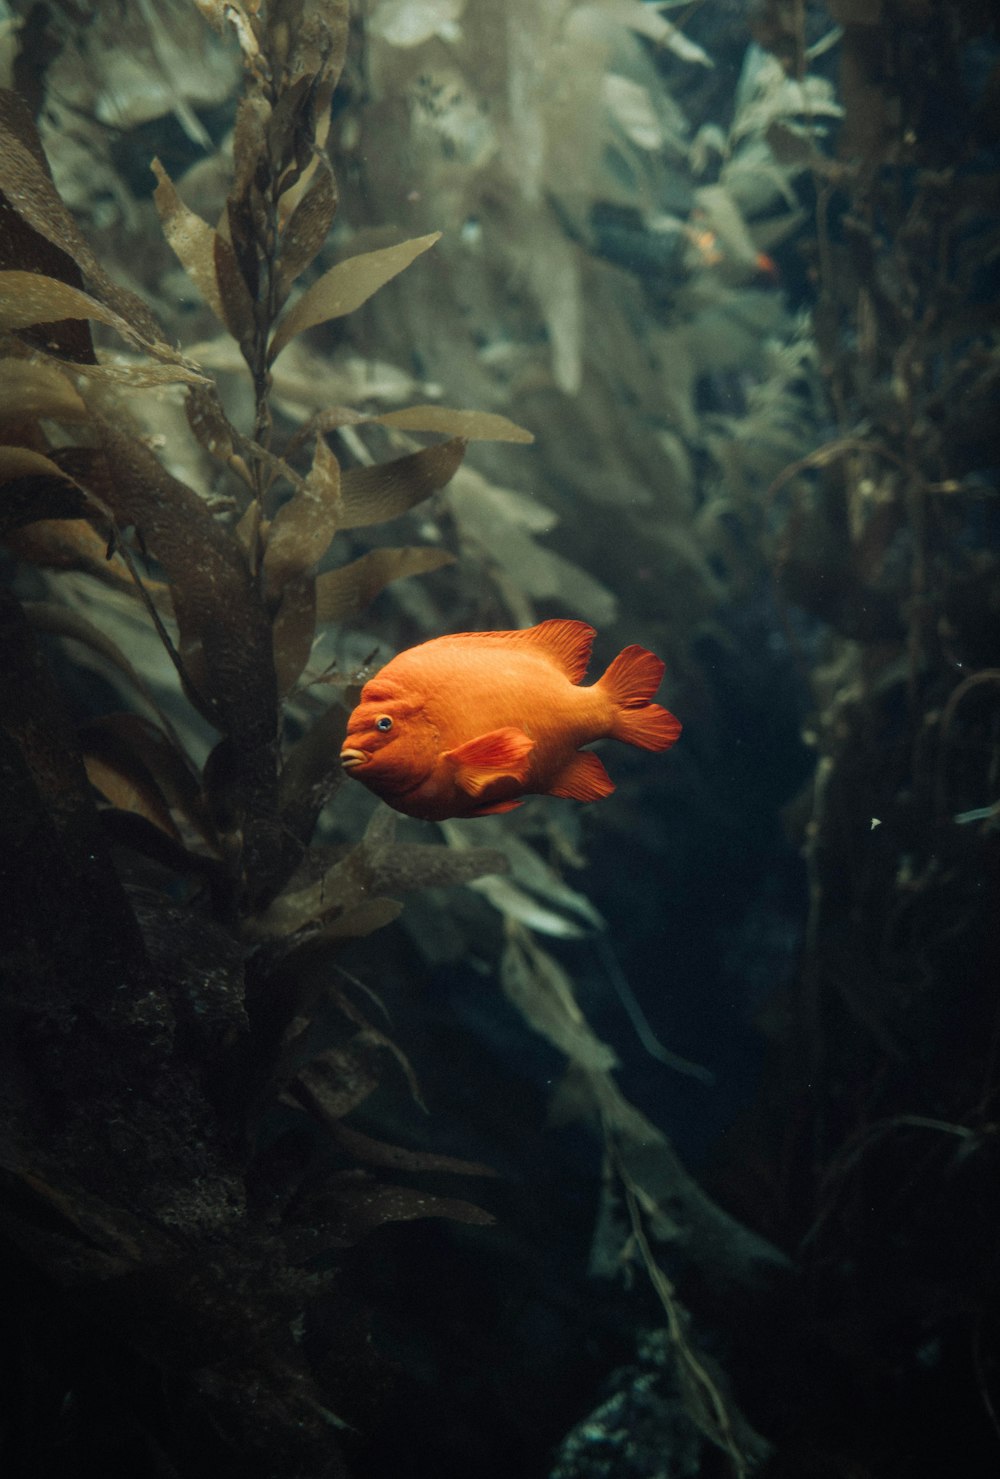 a red fish swimming in an aquarium filled with plants